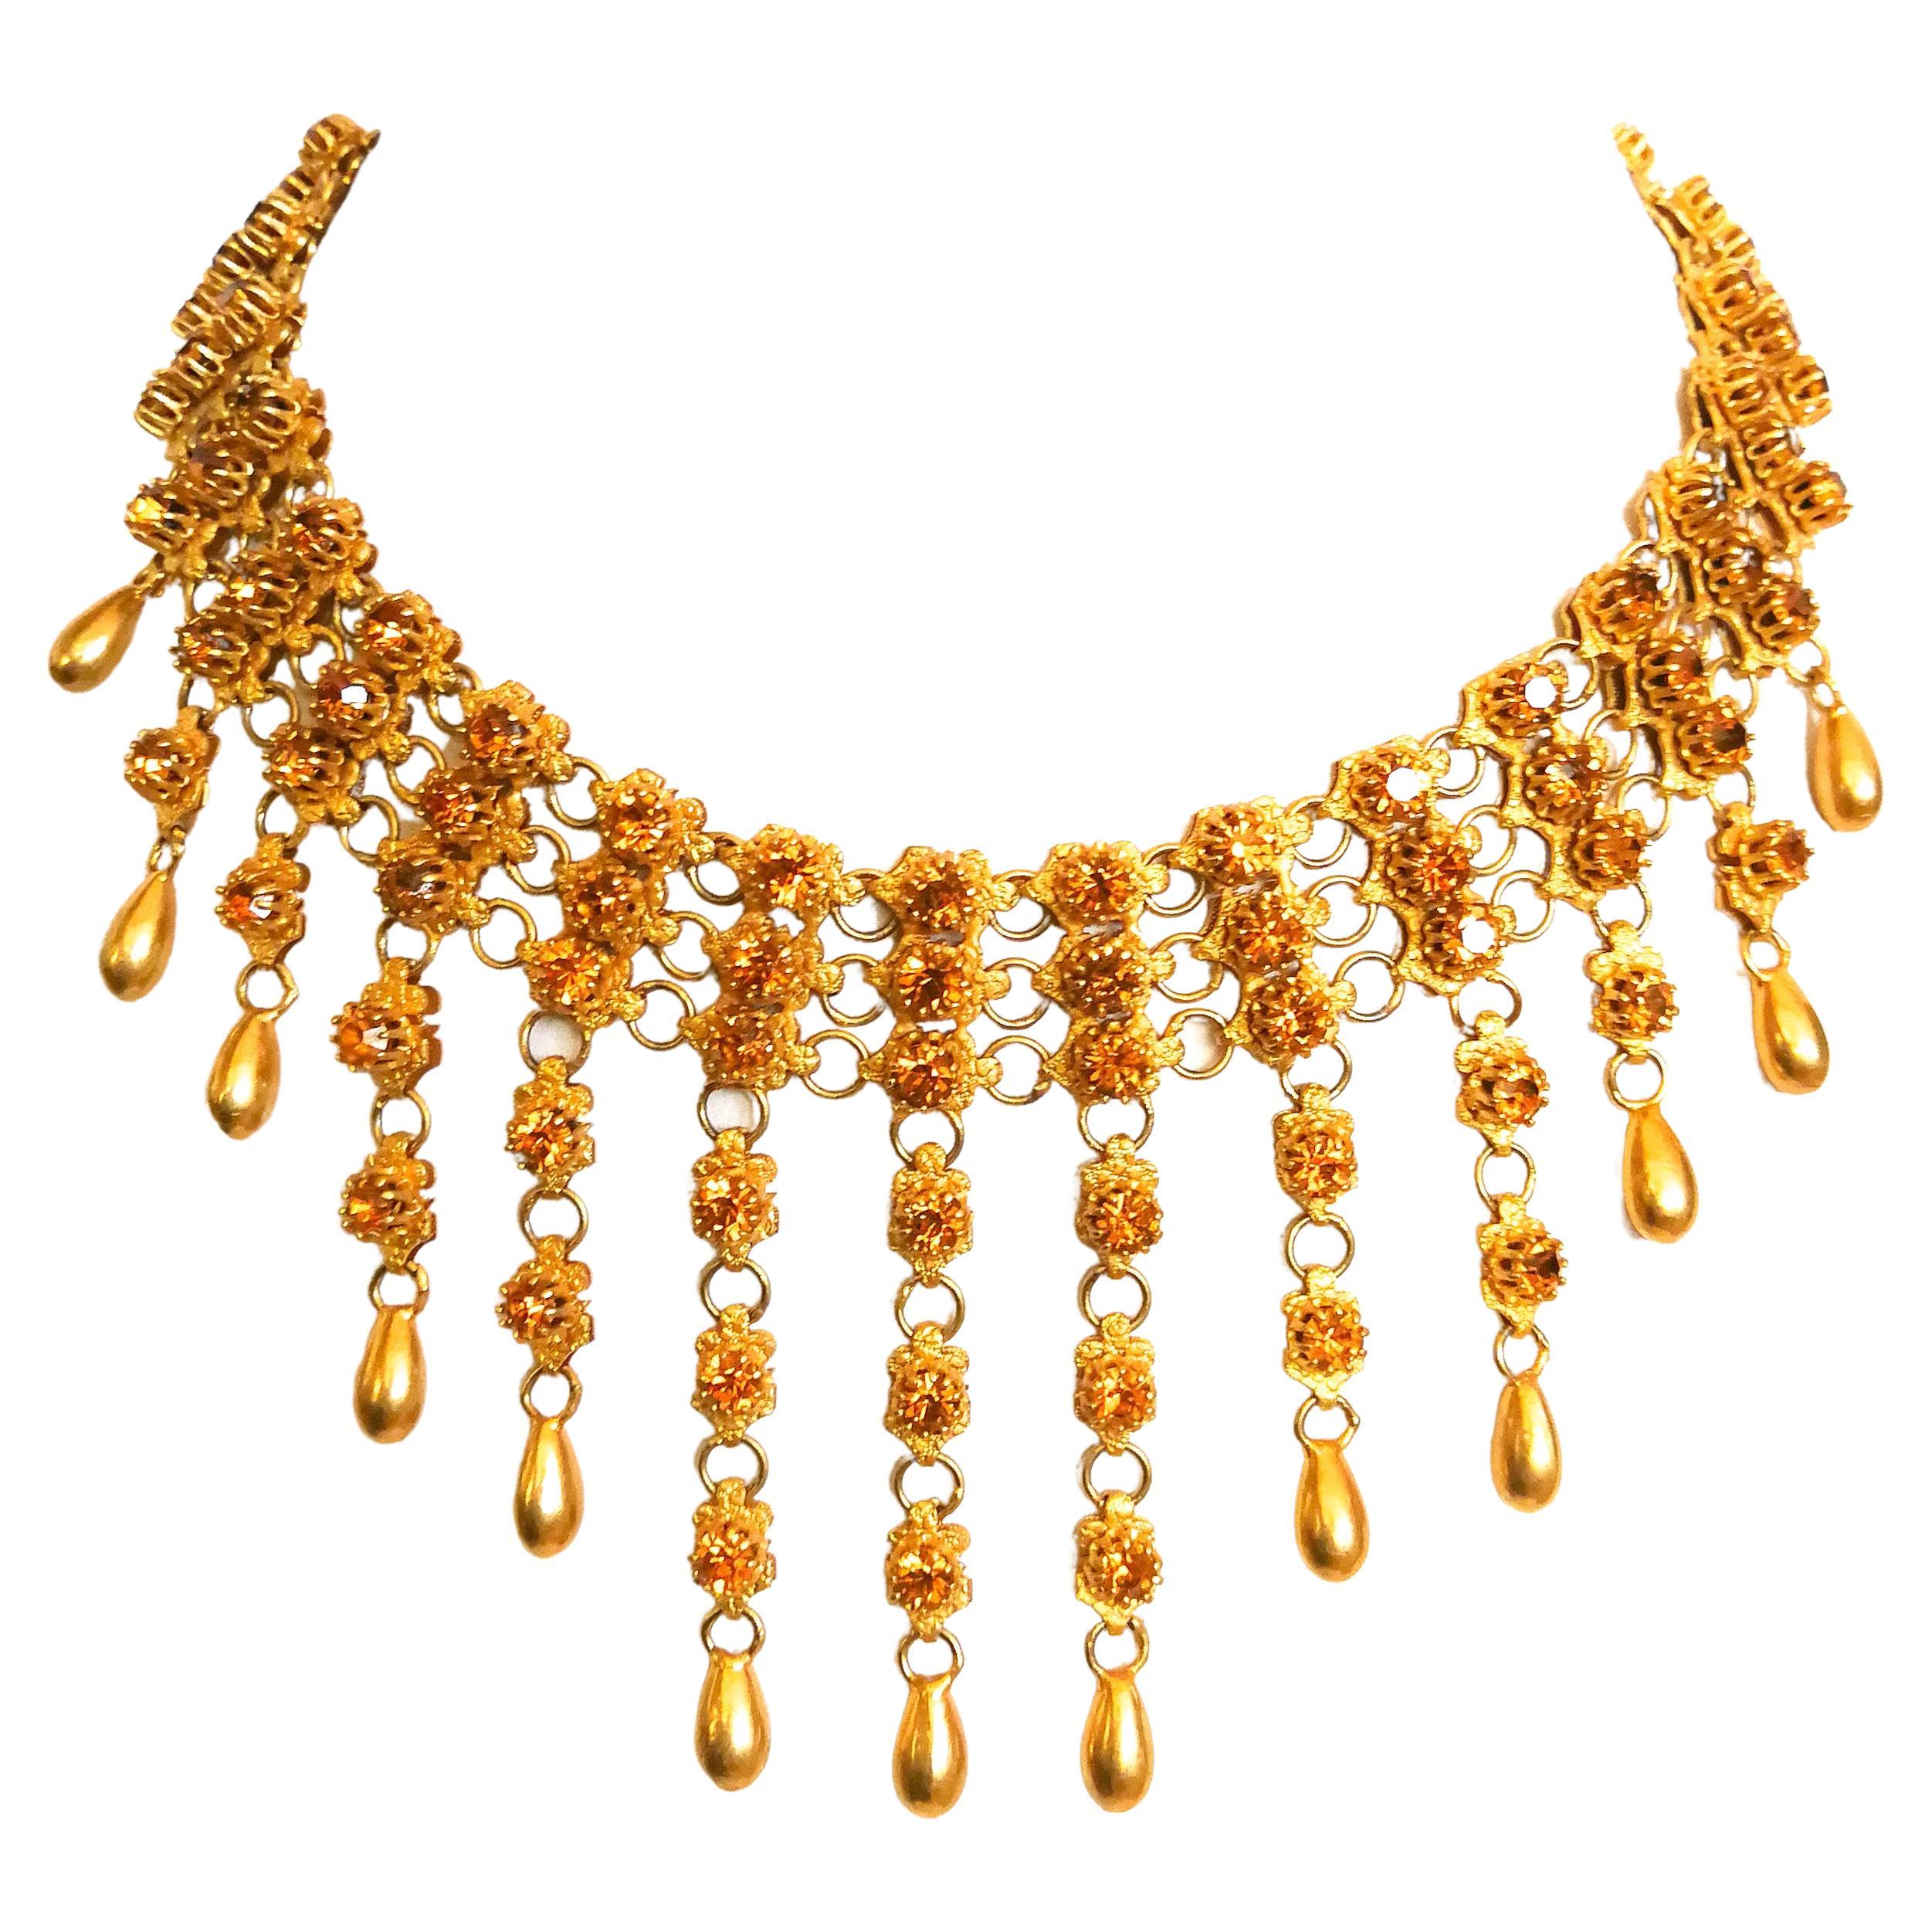 An outstanding and highly unusual necklace and matching earrings, made by Mitchel Maer for Christian Dior. Clear bright topaz coloured pastes are set in softly gilded metal to create a magnificent 'festoon style ' necklace, each 'drop' tipped with a